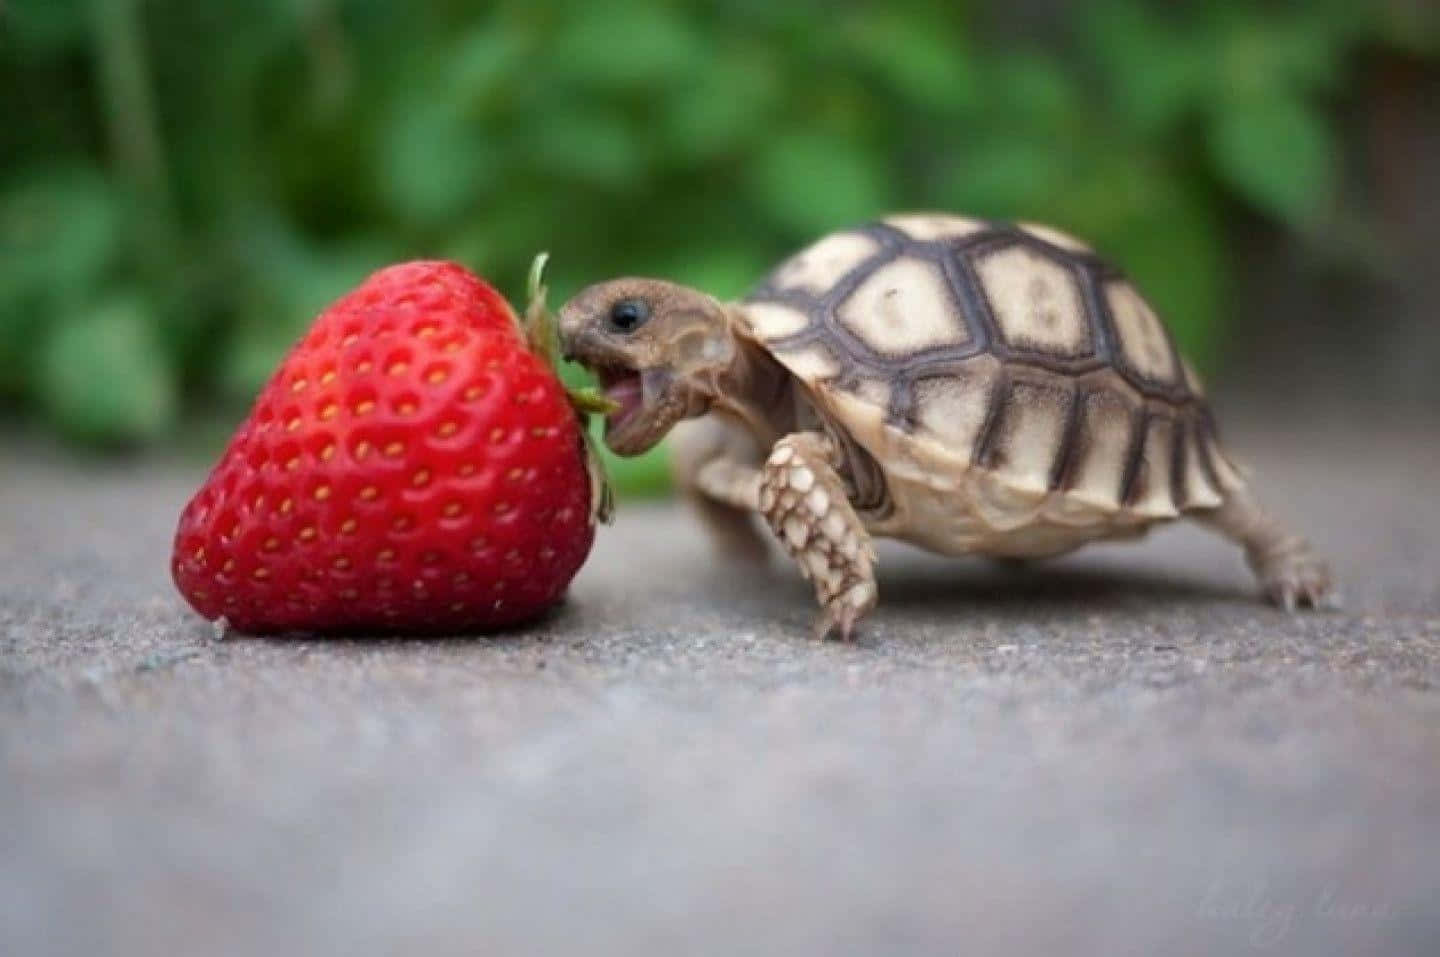 a small tortoise eating a strawberry